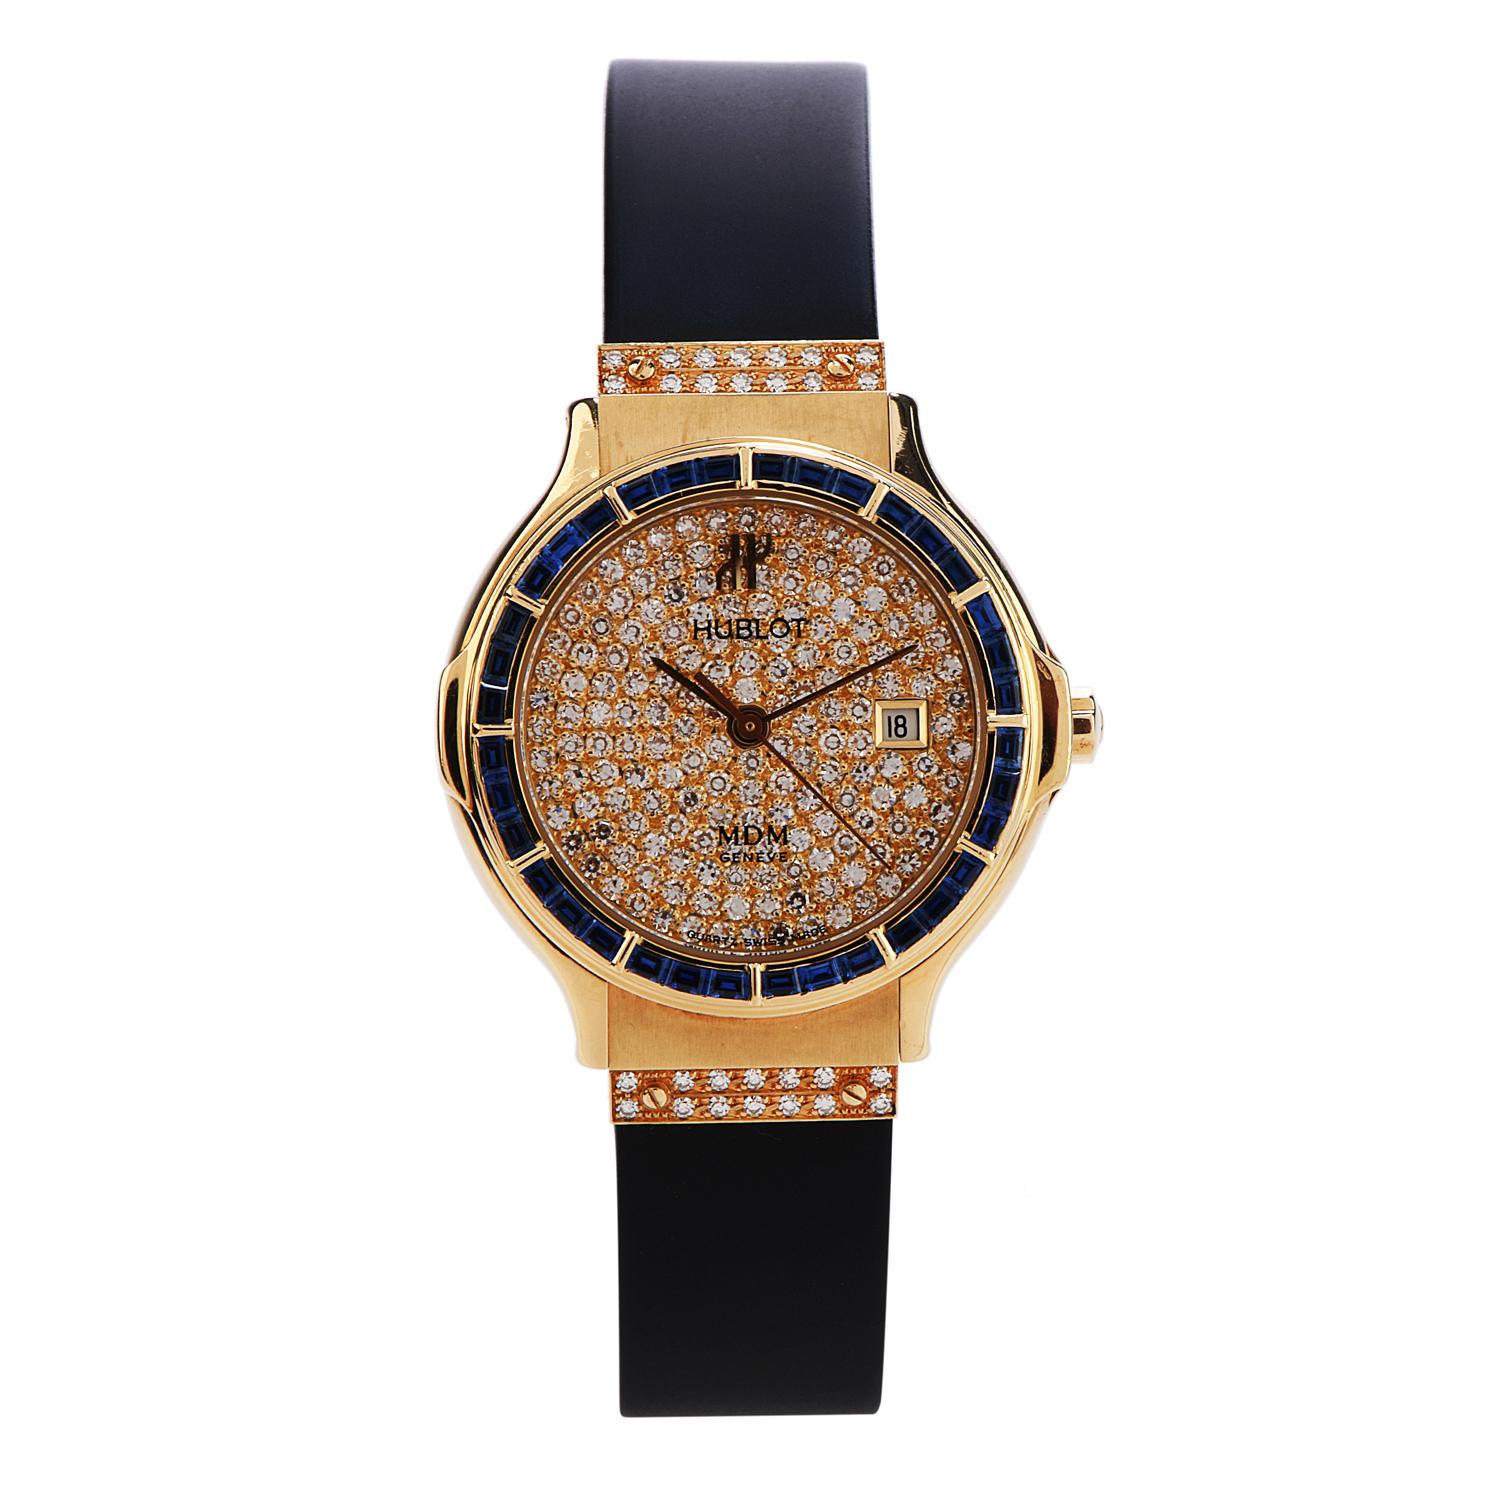 This ladies' boutique watch by Hublot features a 28 mm 18k yellow gold case, surrounding a diamond dial on a black rubber strap and factory-set diamond buckle.

The distinctive sapphire bezel, embellished with 36 baguette-shaped blue sapphires,